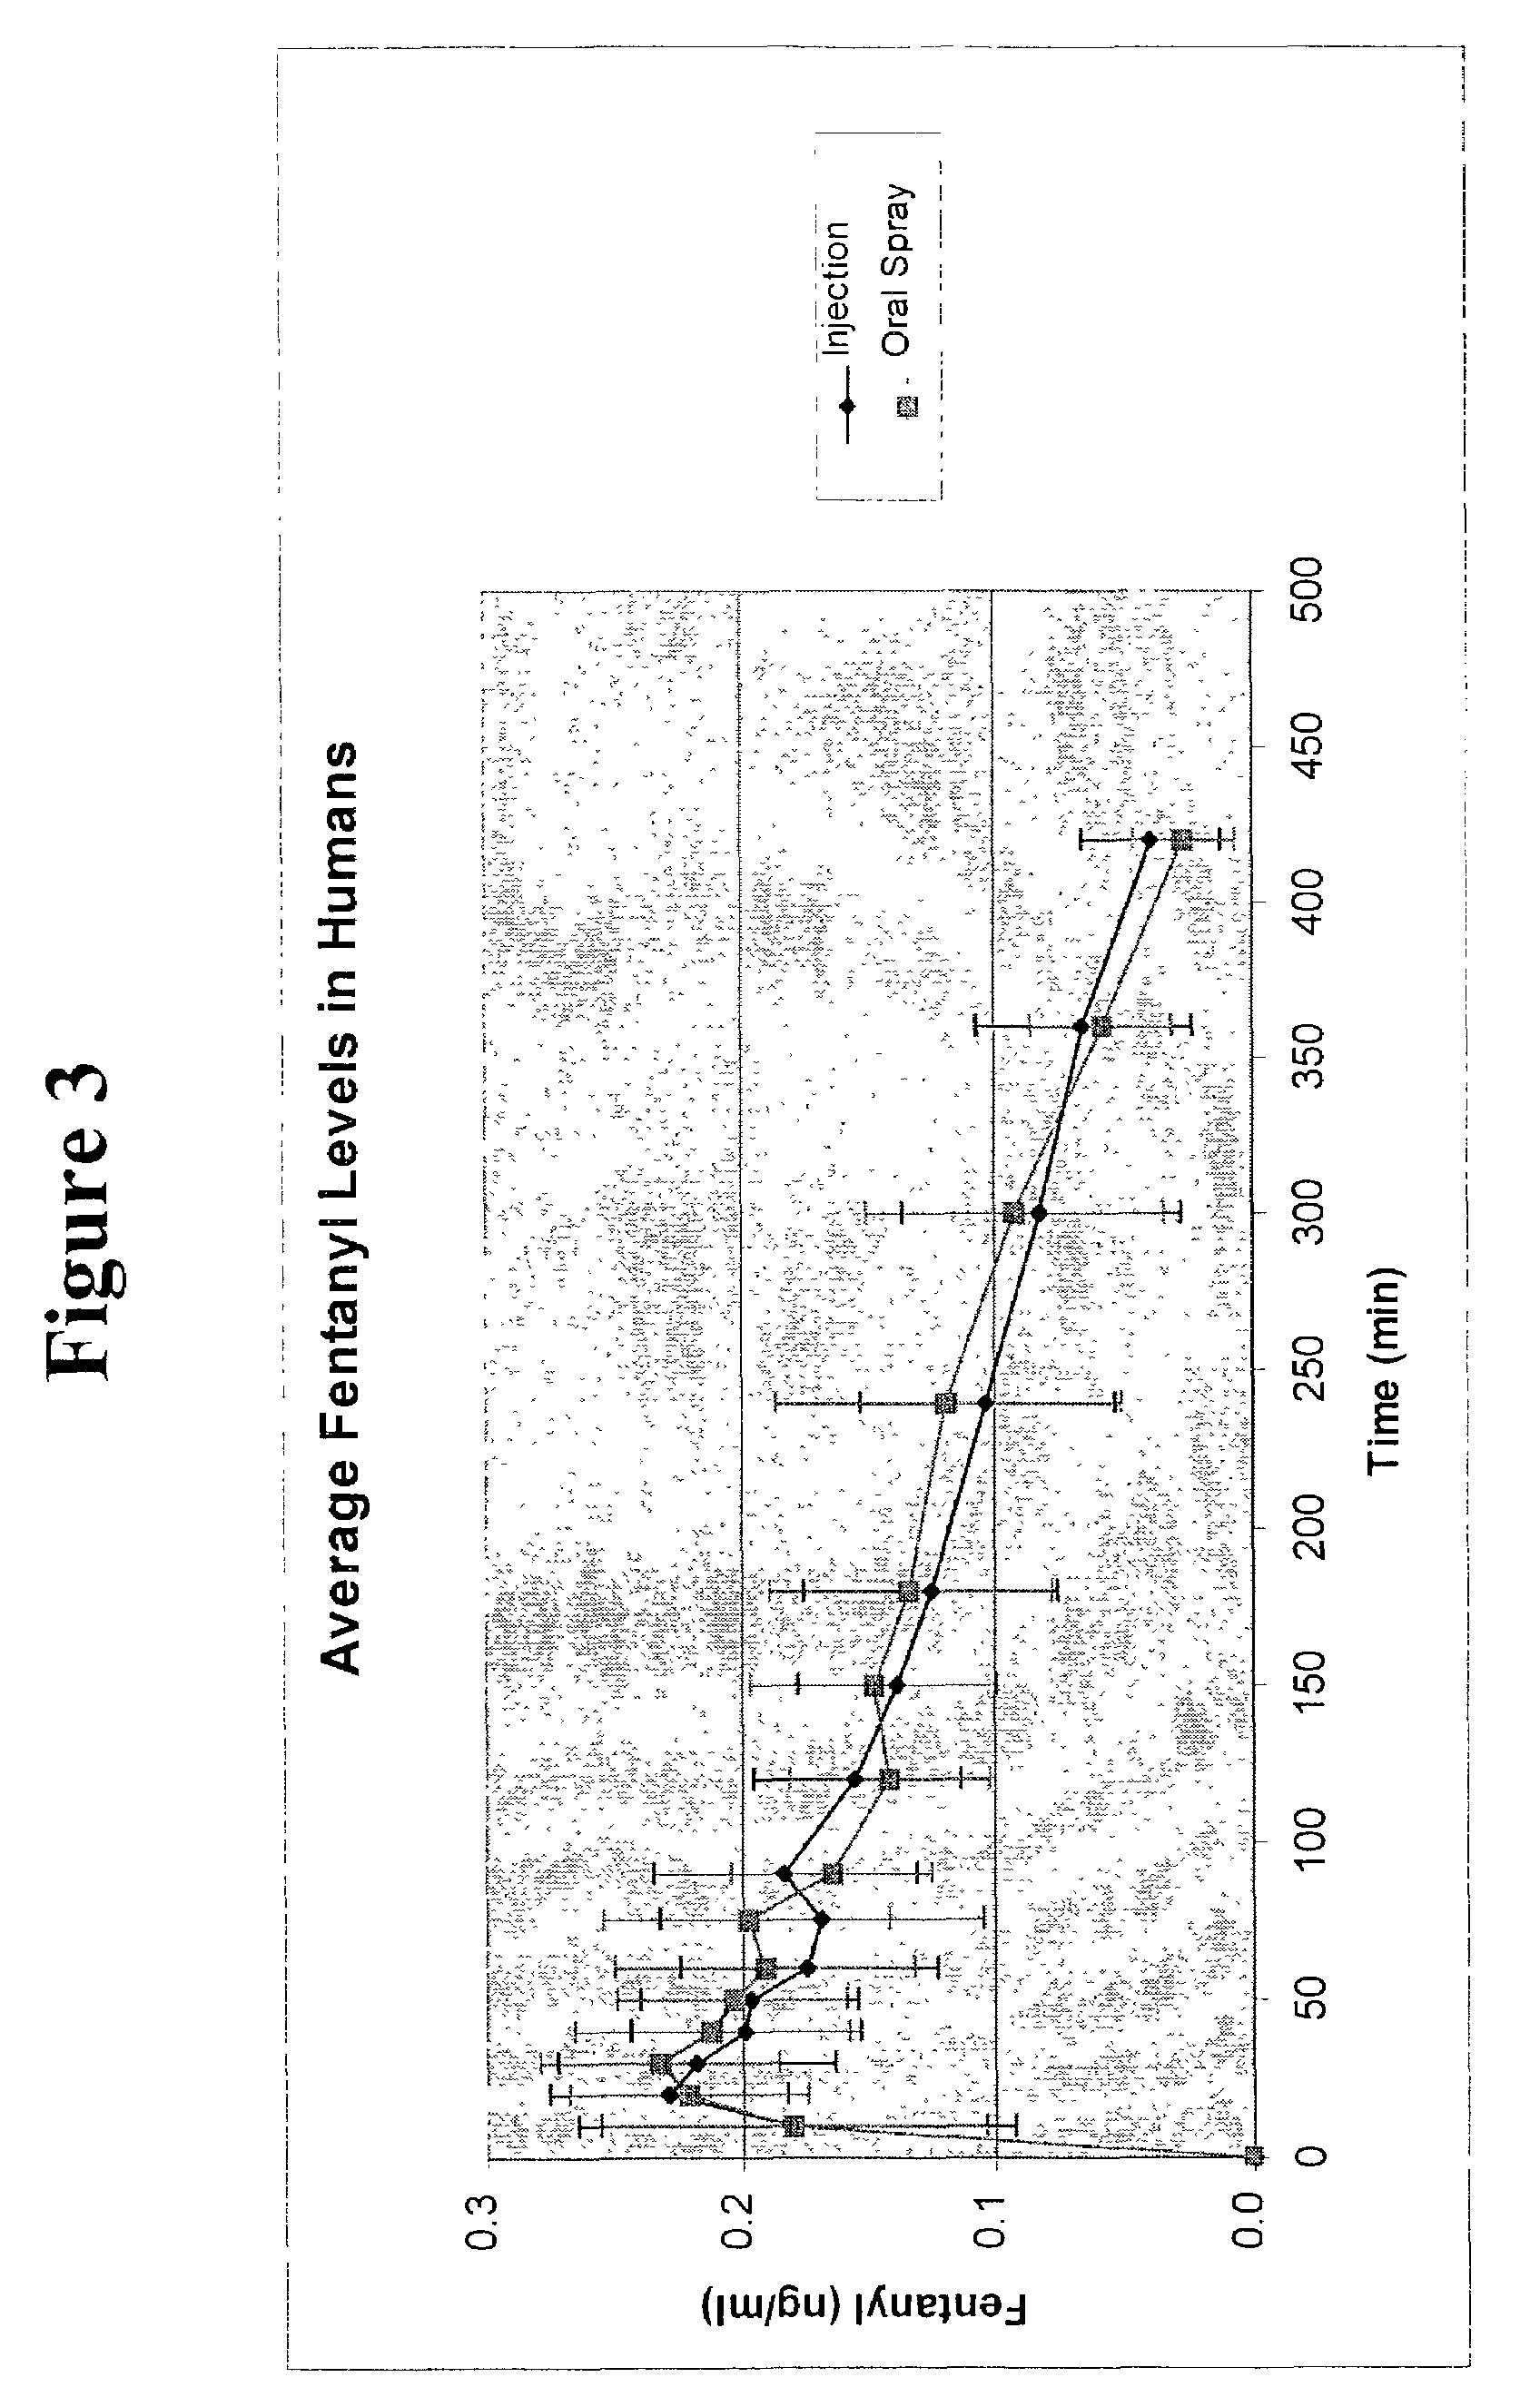 Methods of administering and enhancing absorption of pharmaceutical agents